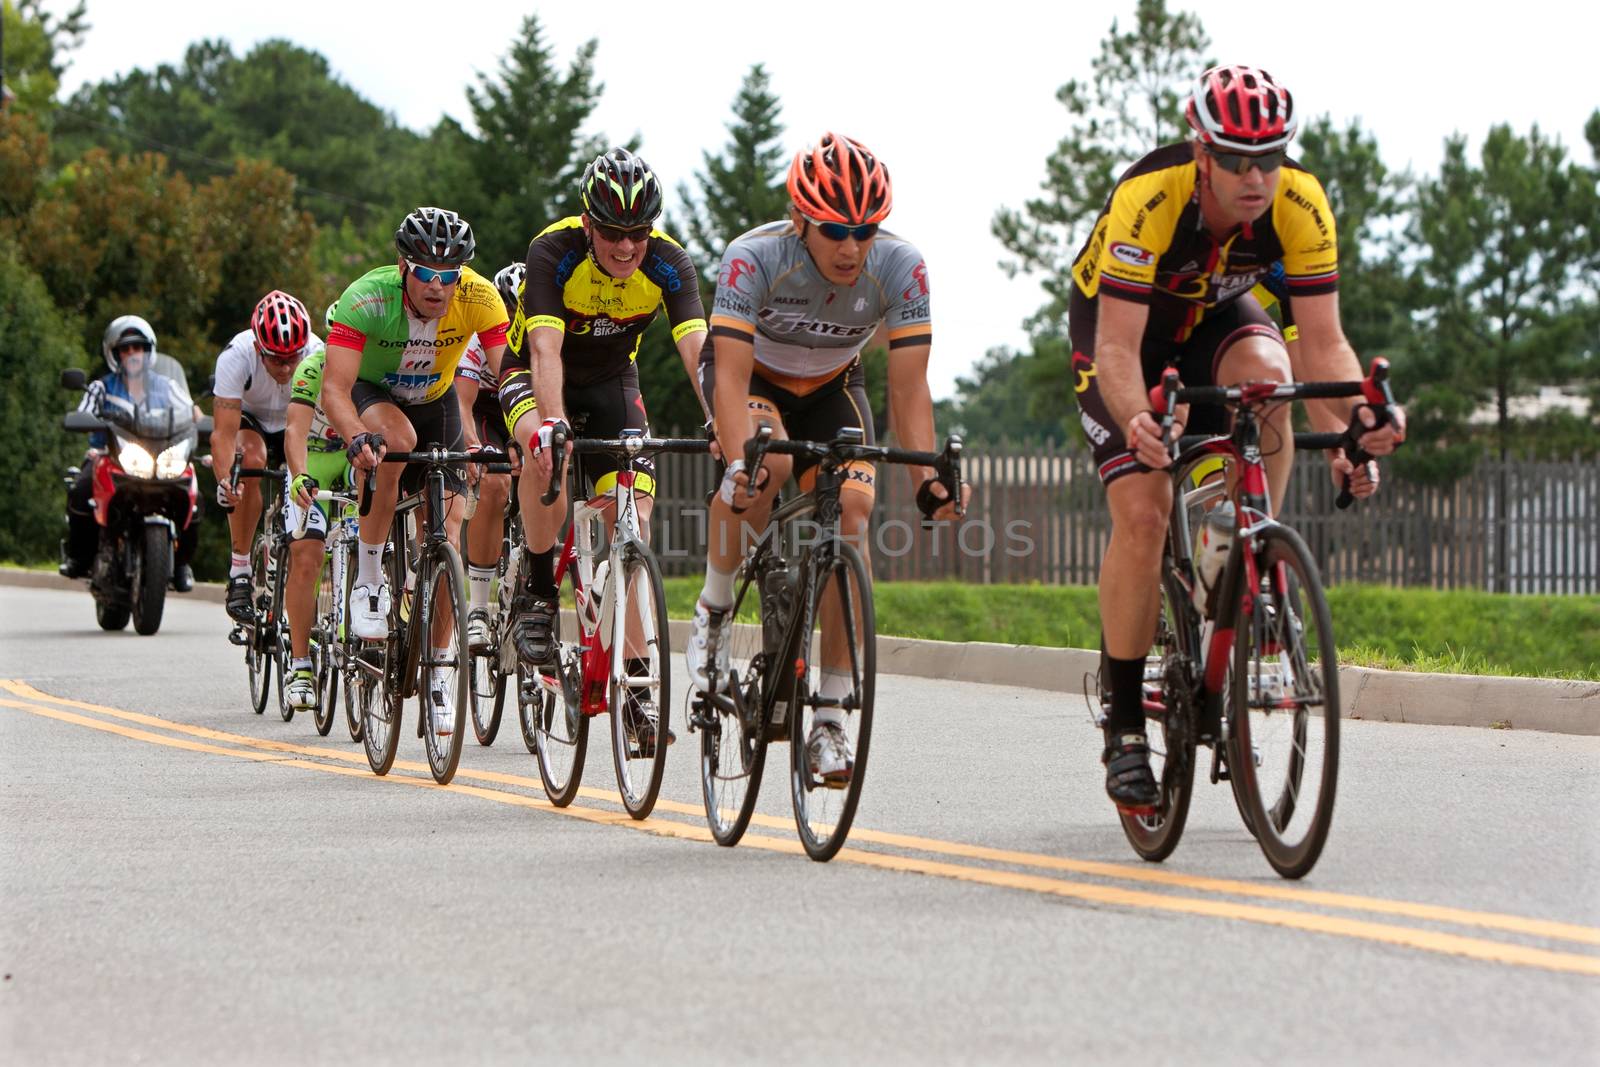 Duluth, GA, USA - August 2, 2014:  Cyclists bunched together in a pack race through a straightaway in the Georgia Cup, a criterium event held on the streets of downtown Duluth.